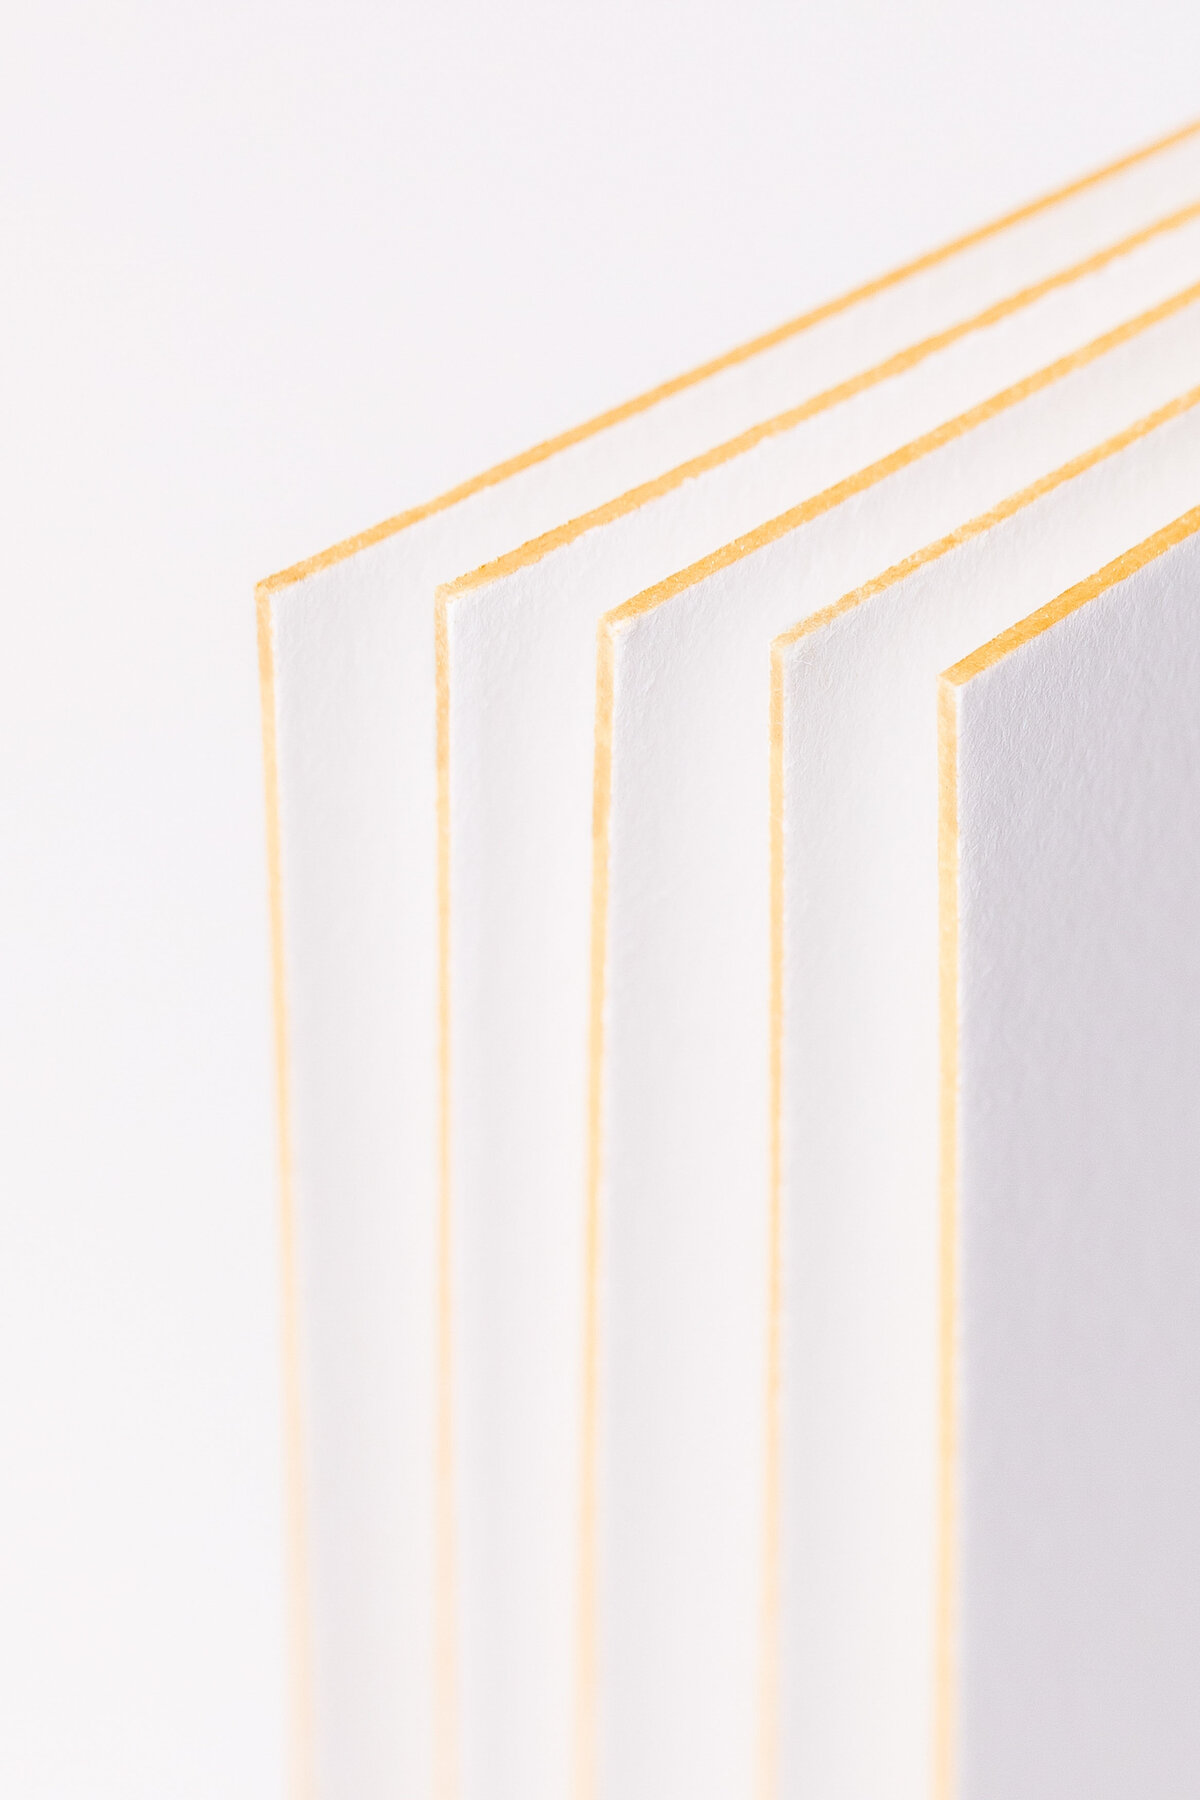 close up of paper with gold foil lined edges